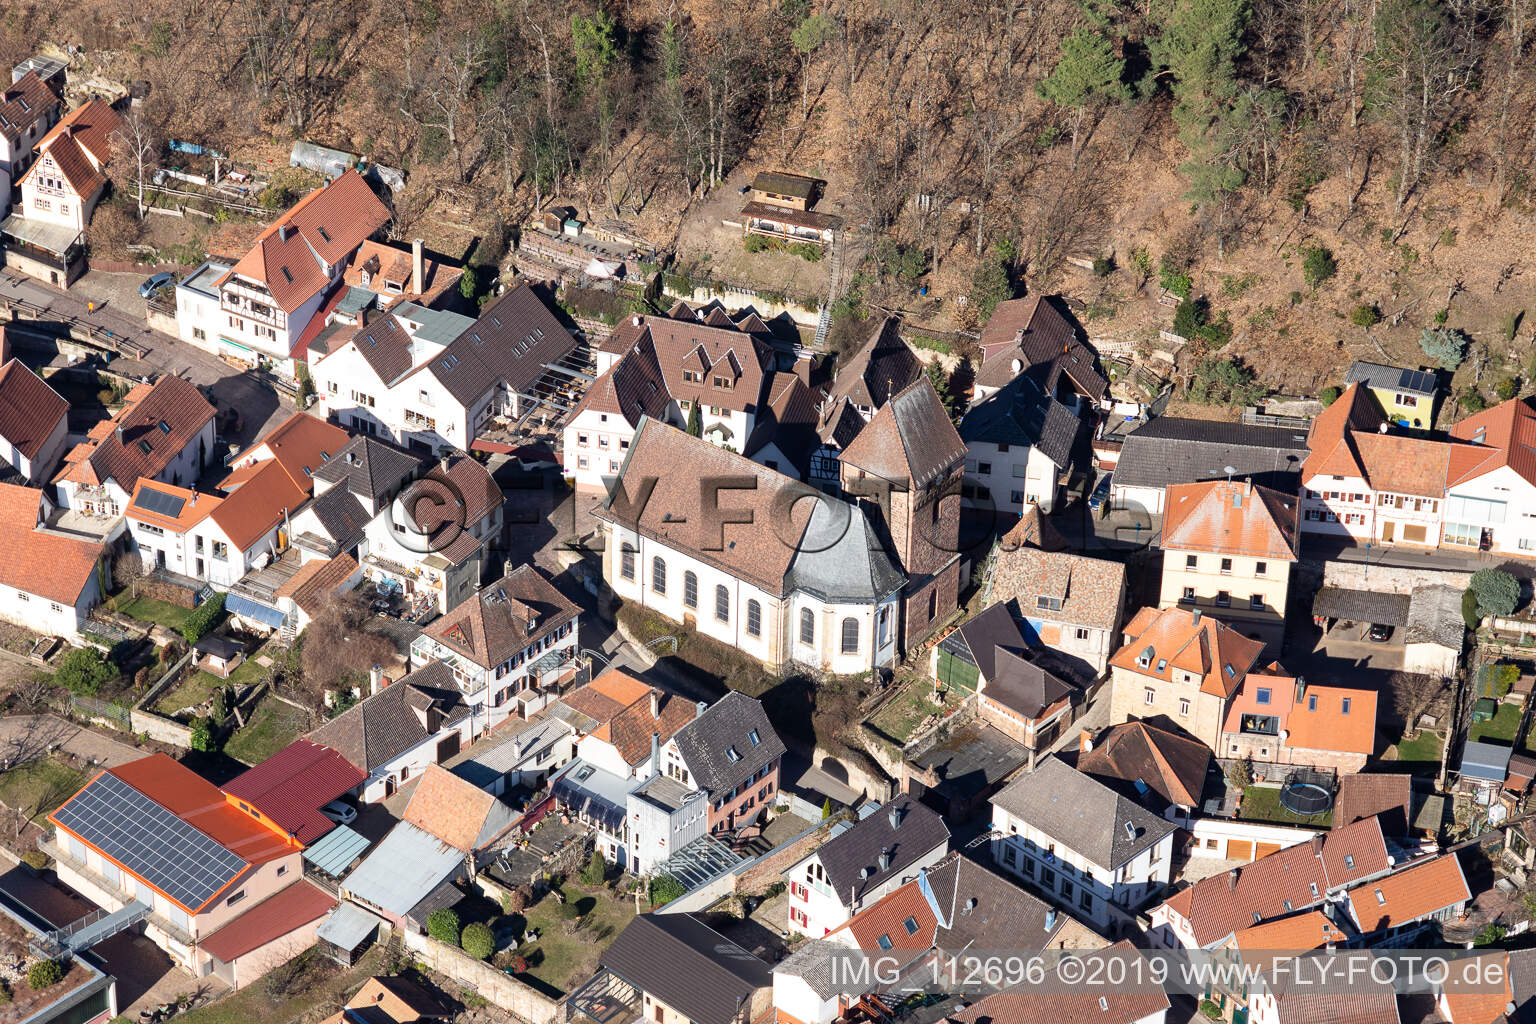 Gleisweiler in the state Rhineland-Palatinate, Germany from above